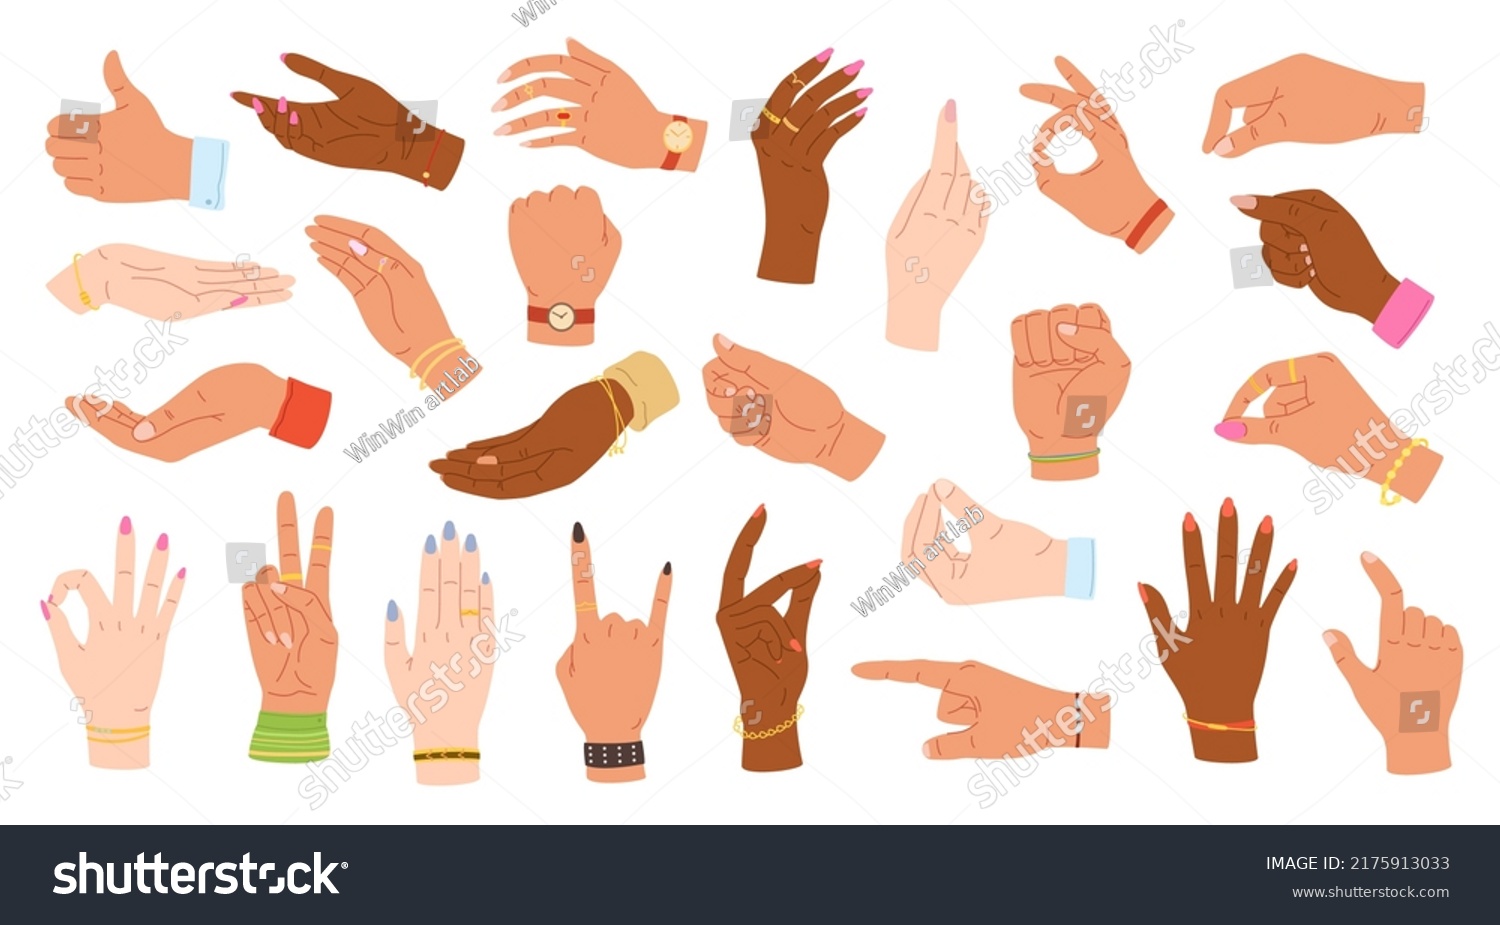 SVG of Hand gestures. Human hands hold, point and grip. Multiethnic hands with accessories on wrists vector Illustration set. Female and male characters wearing rings, bracelet and watch using body language svg